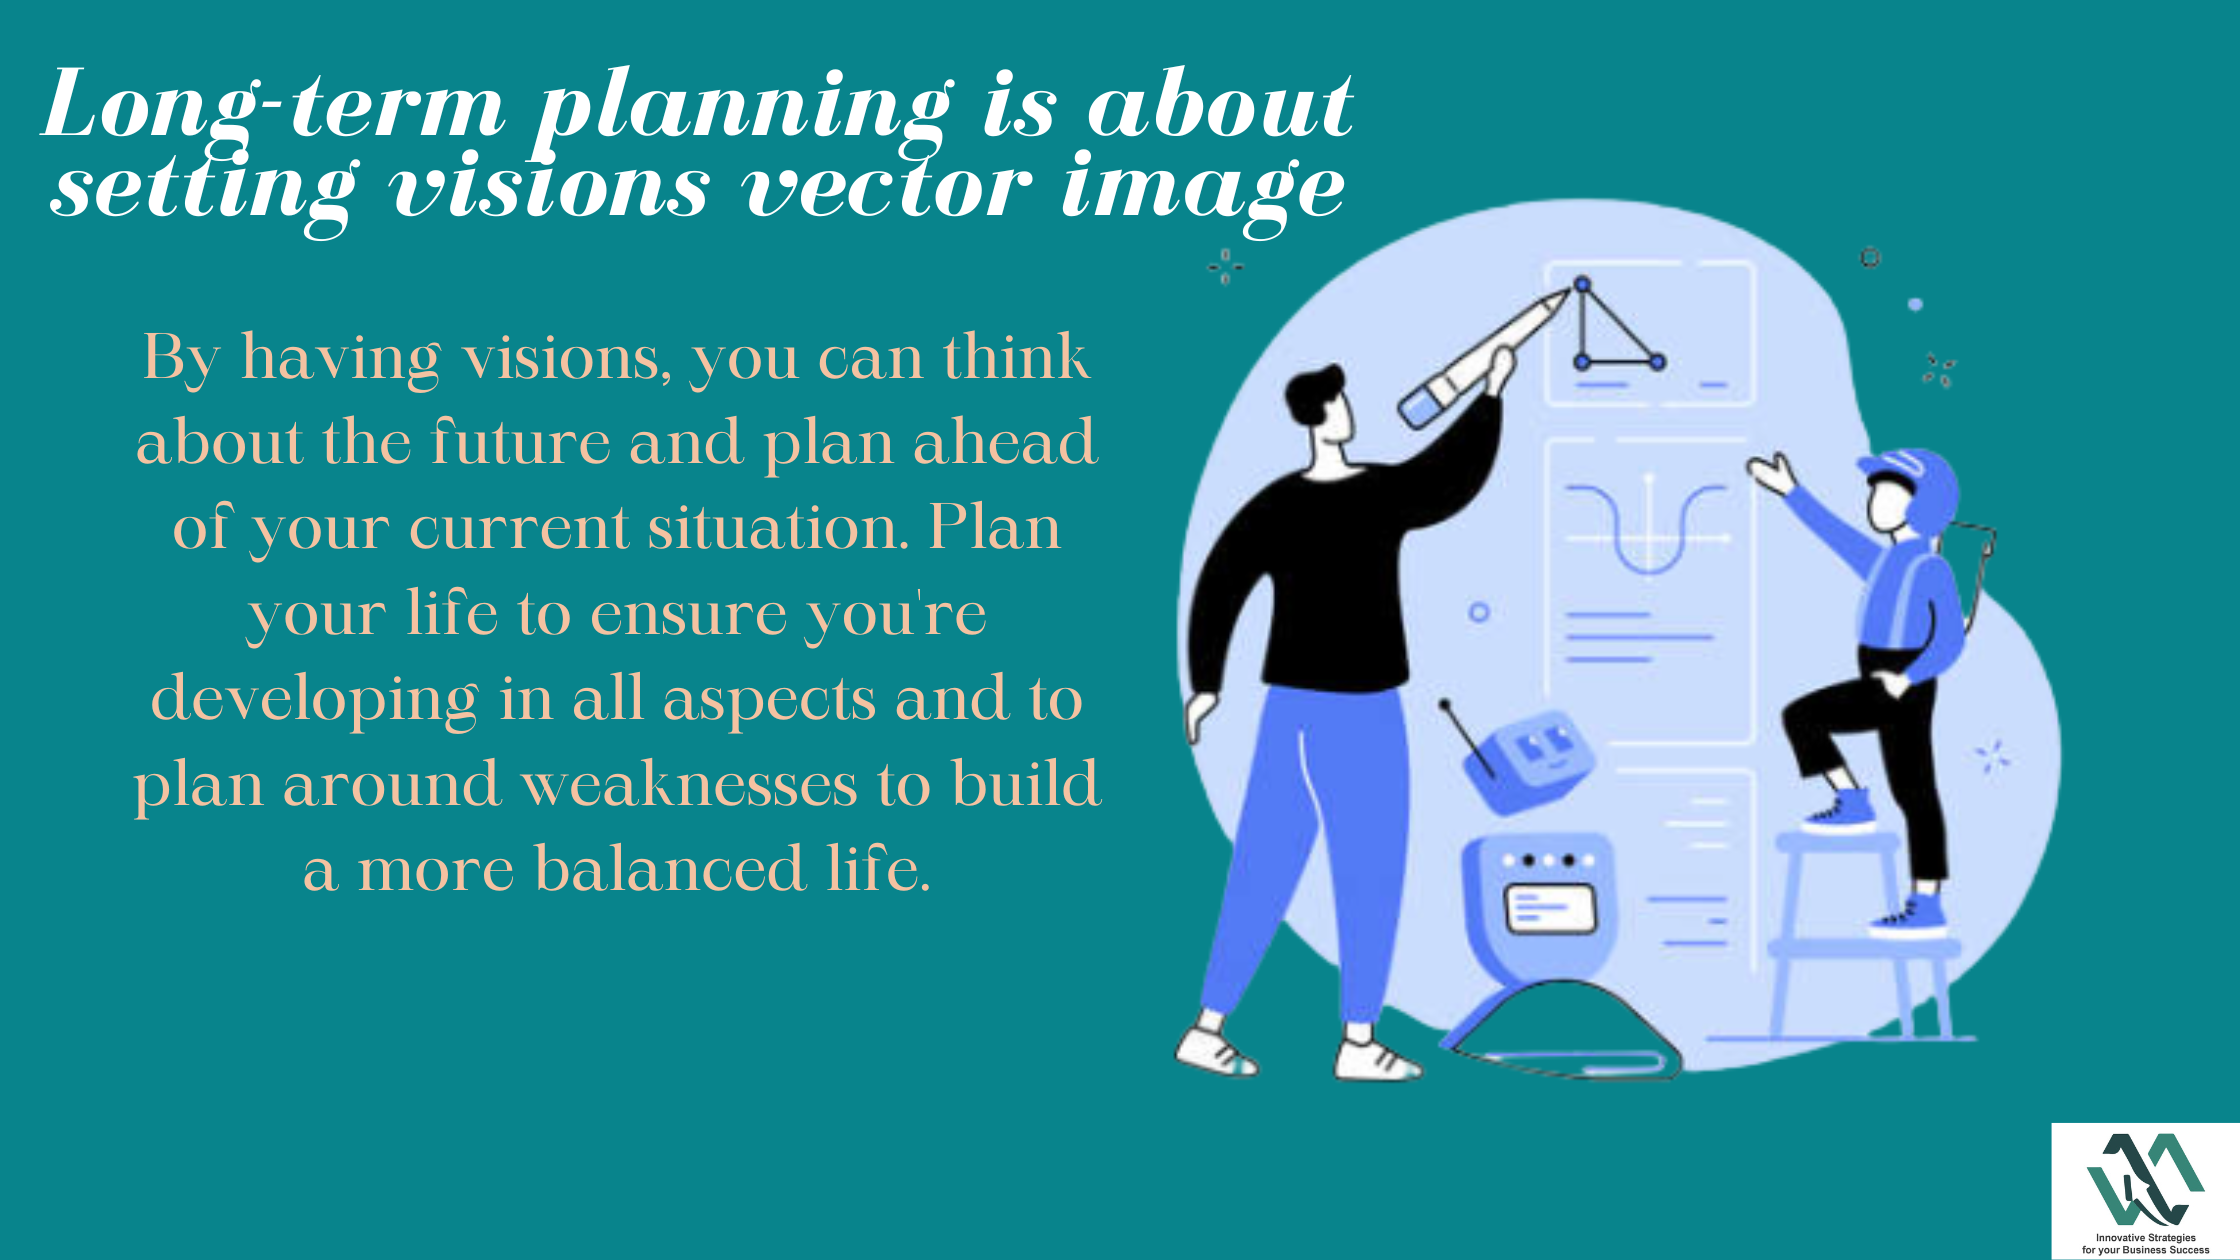 Long-term planning is about setting visions